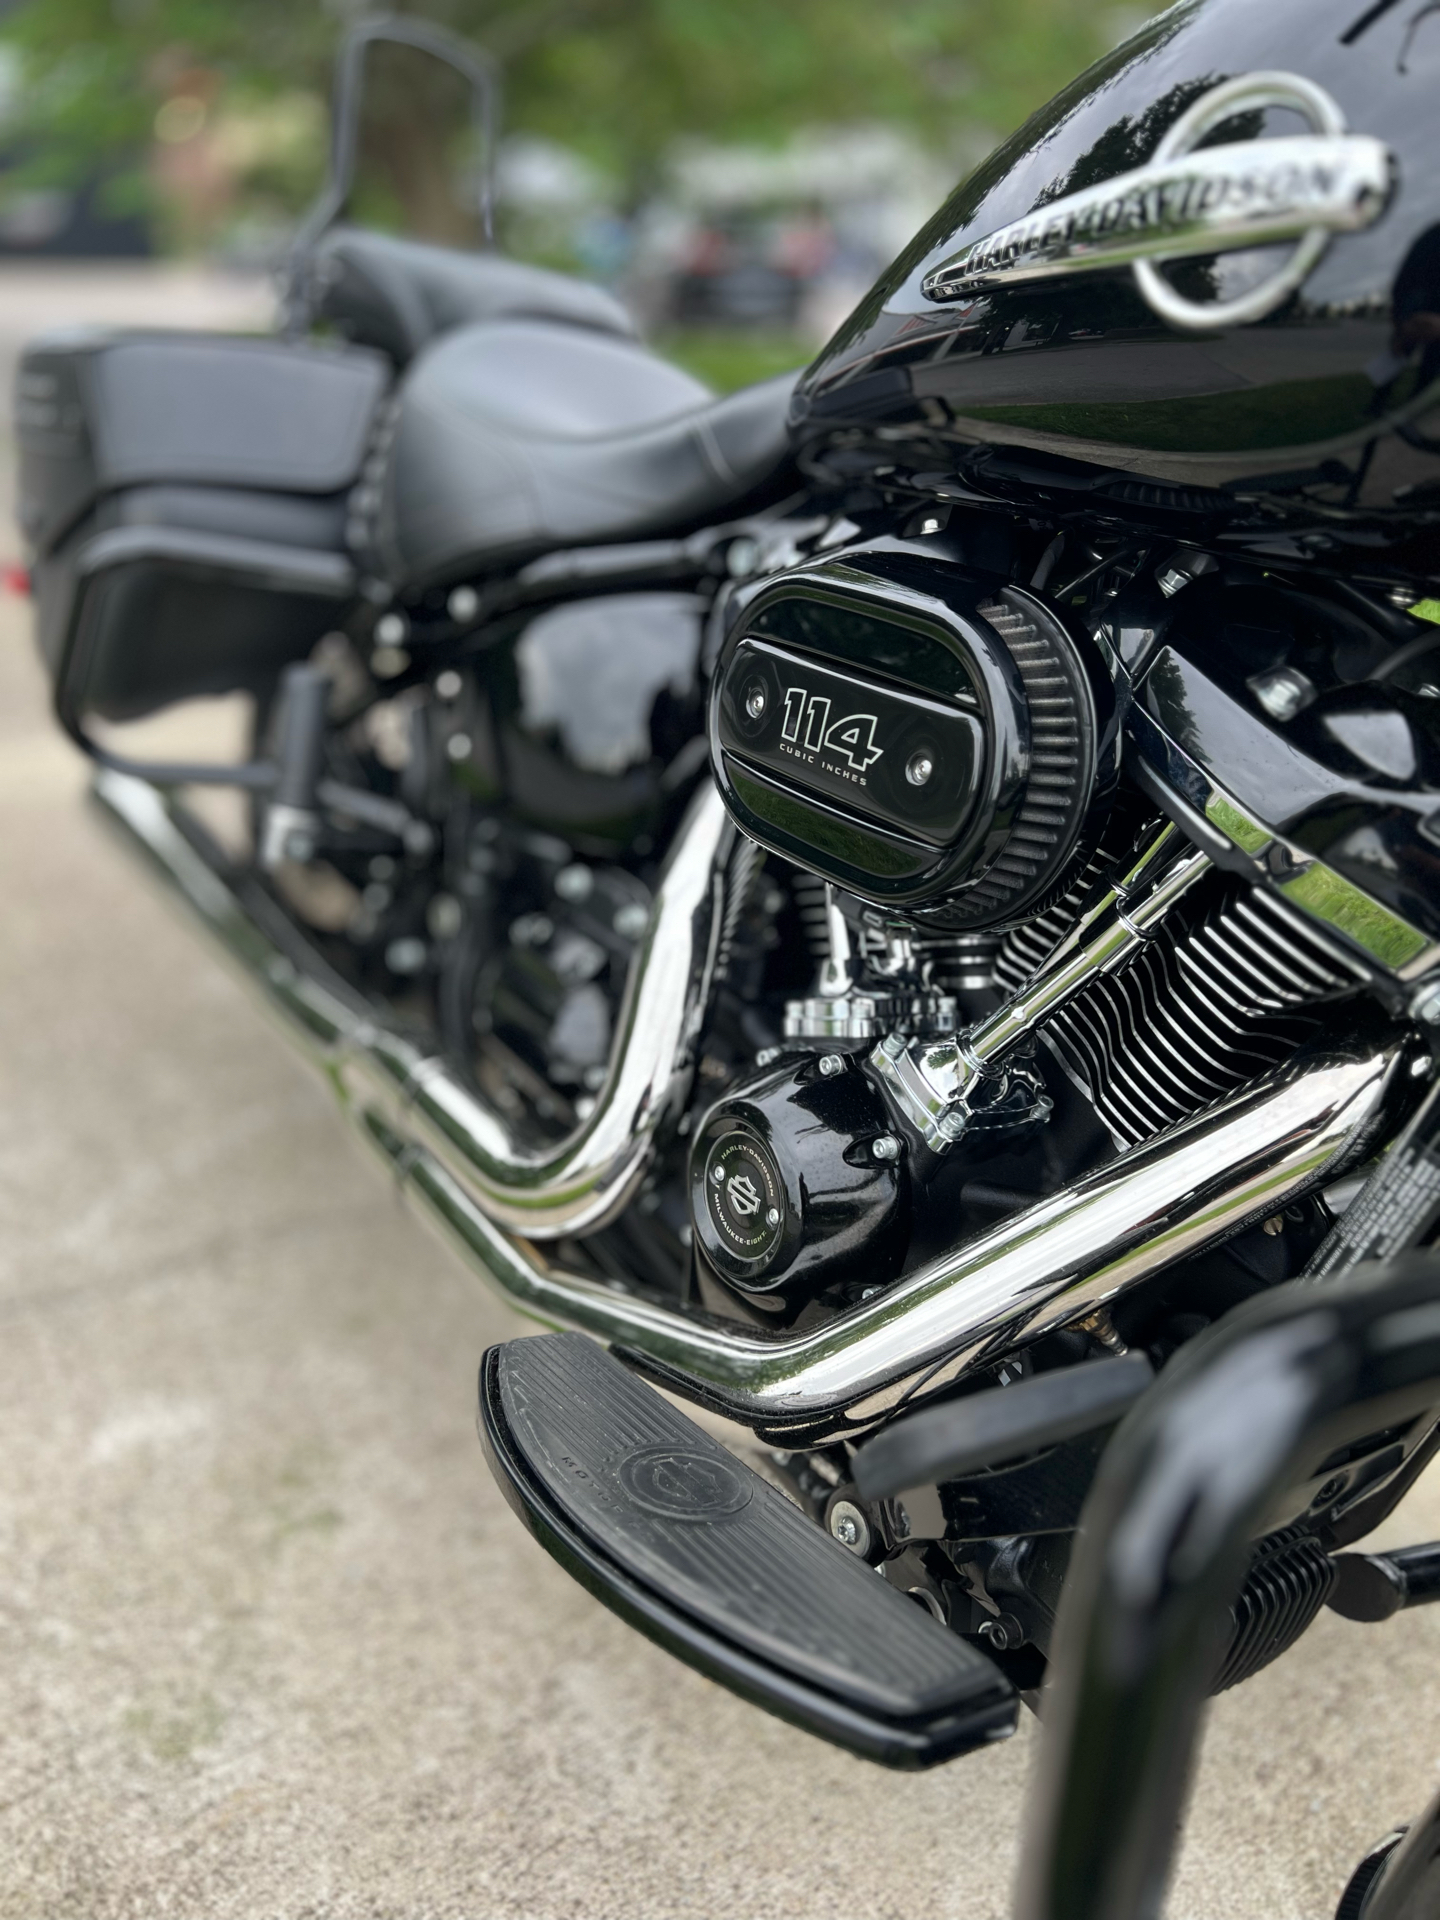 2019 Harley-Davidson Heritage Classic 114 in Franklin, Tennessee - Photo 4